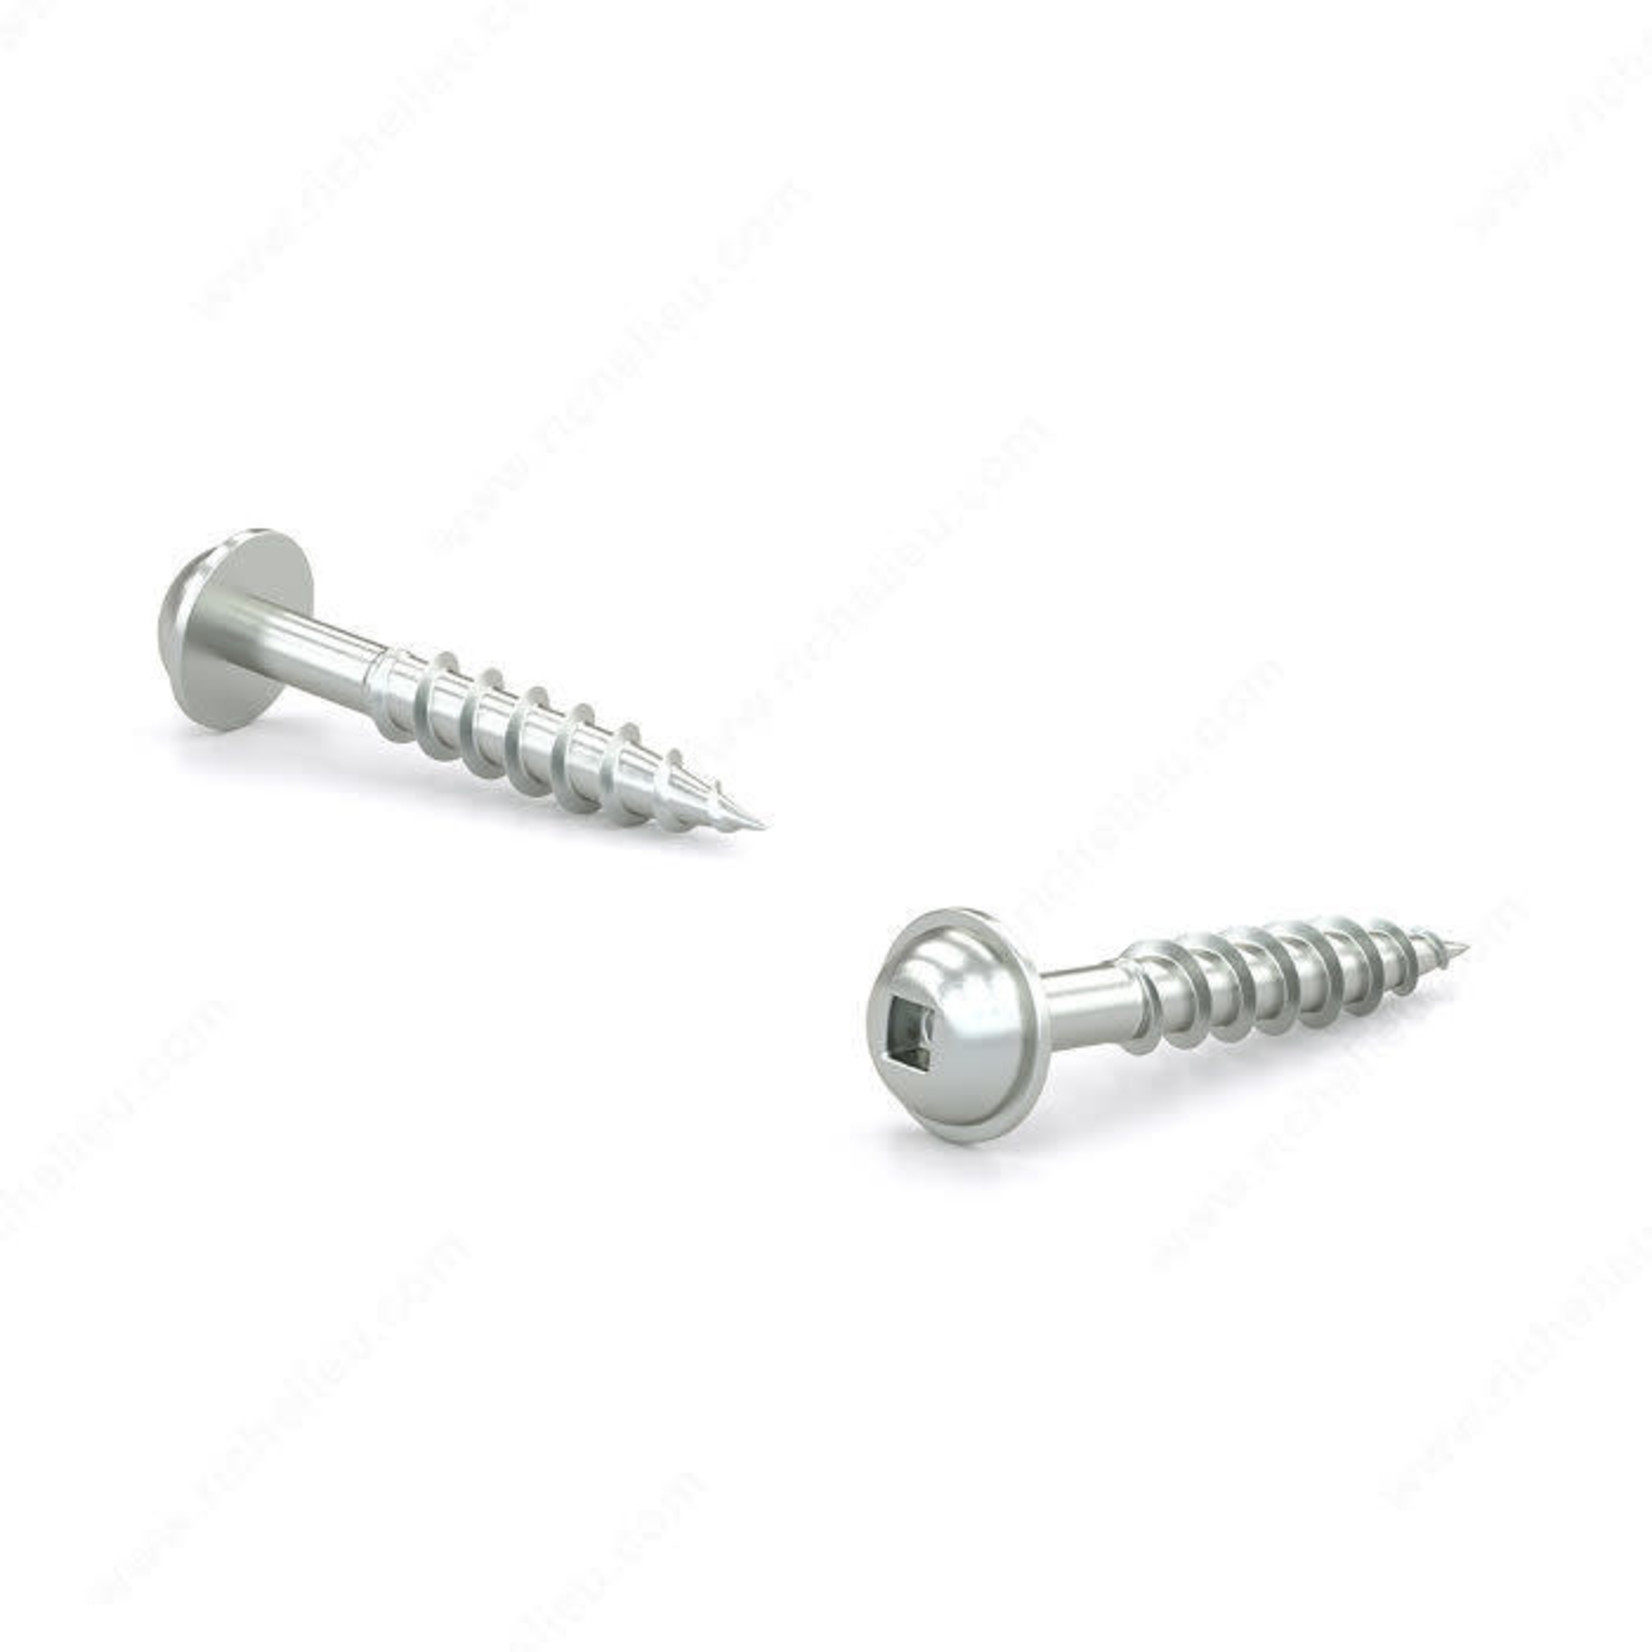 RELIABLE WOOD SCREW, PAN WASHER, COURSE THREAD, #8 1-1/2IN, 100PK